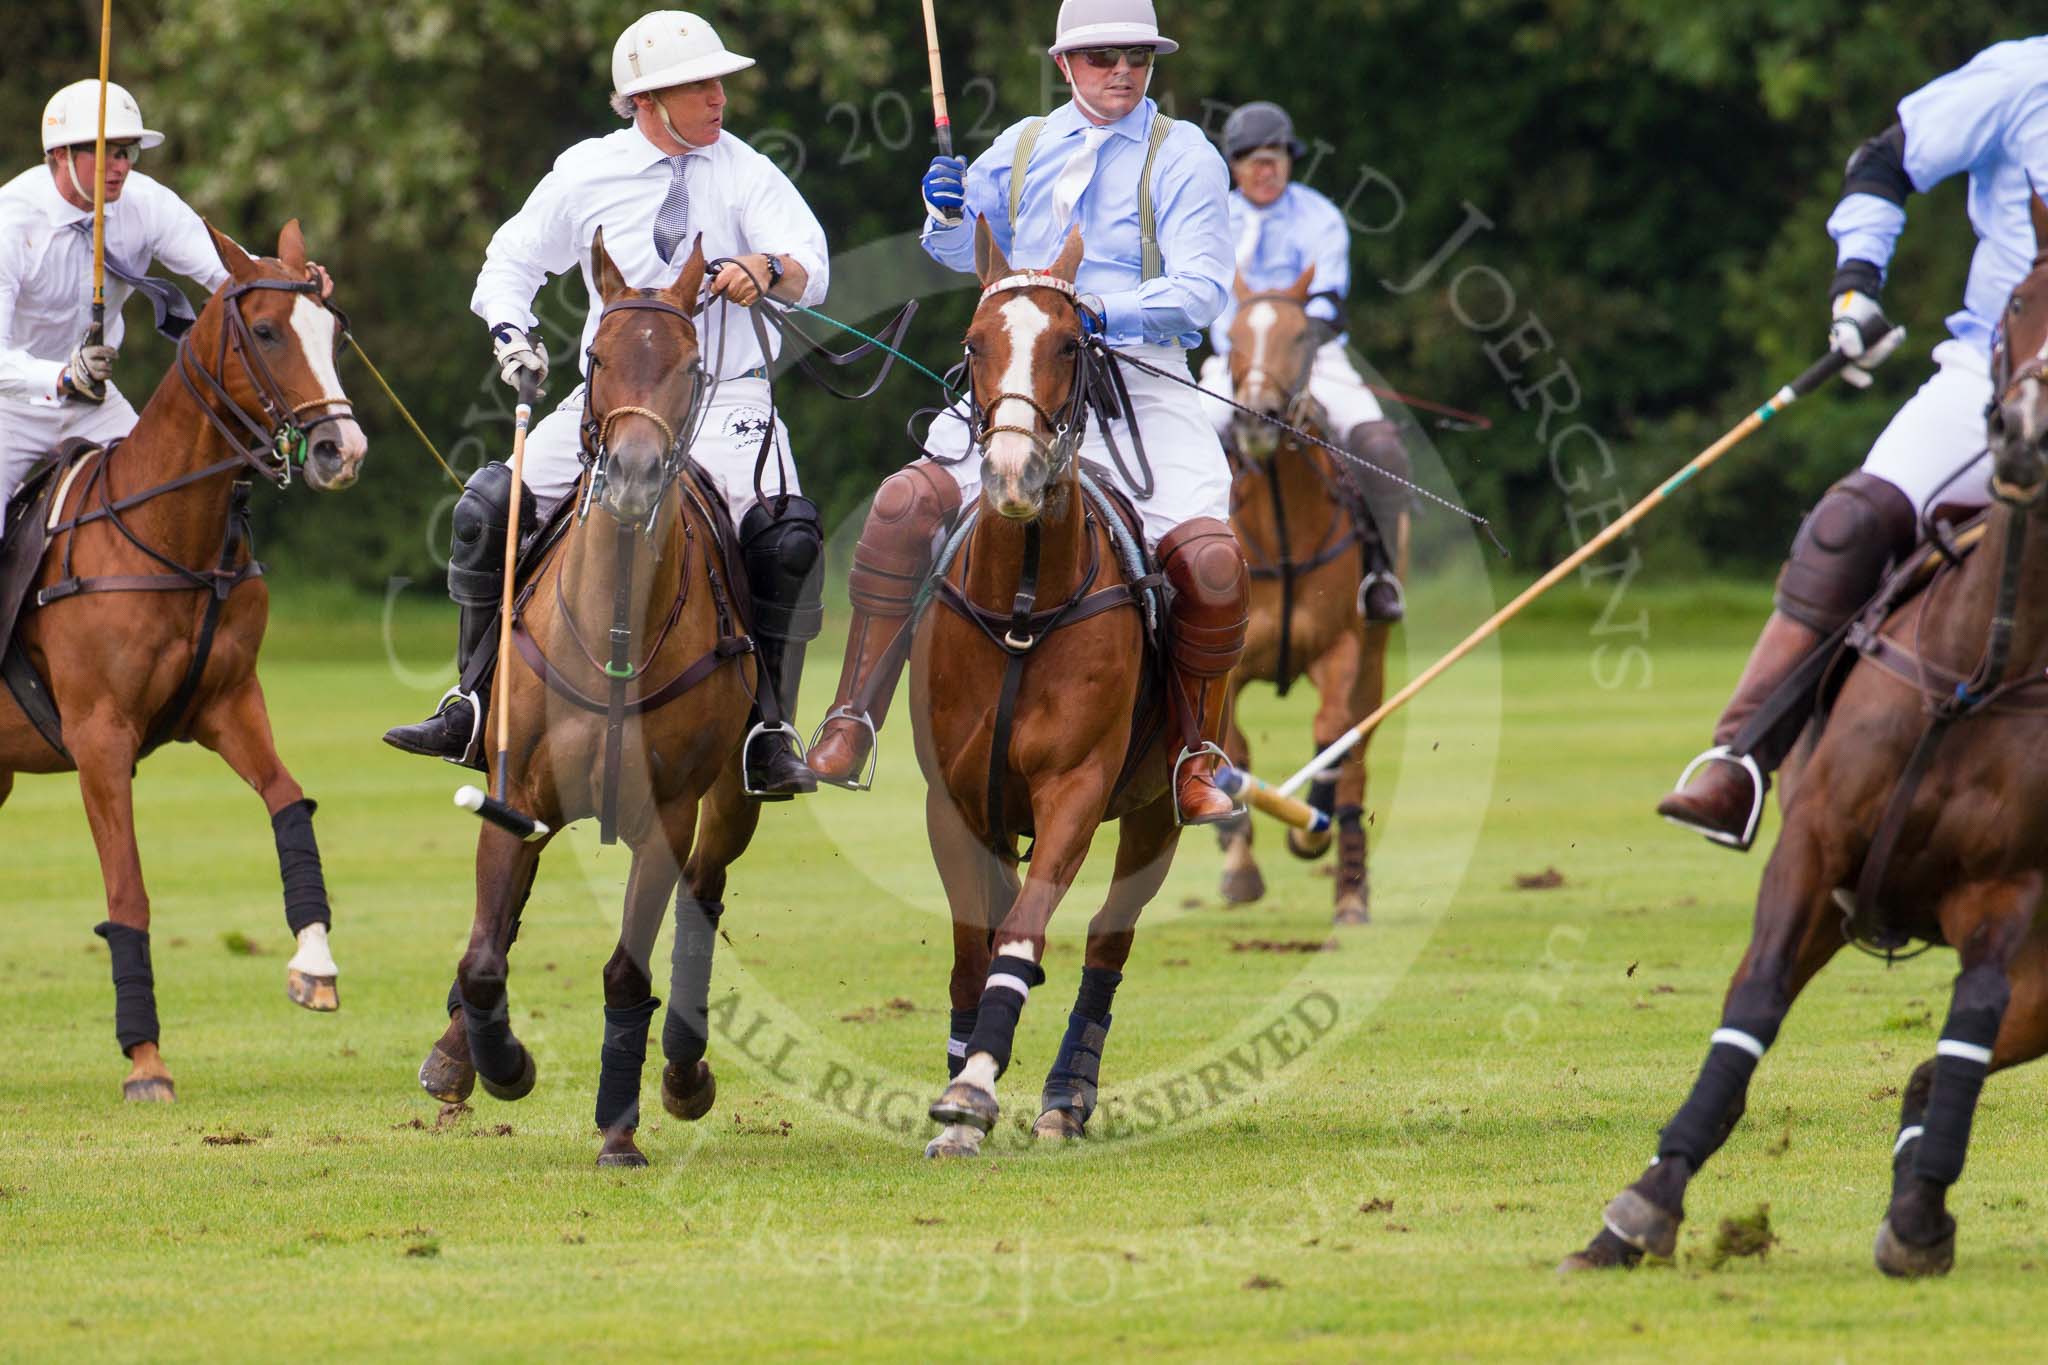 7th Heritage Polo Cup semi-finals: Paul Oberschneider La Golondrina riding along side Timothy Rose La Mariposa..
Hurtwood Park Polo Club,
Ewhurst Green,
Surrey,
United Kingdom,
on 04 August 2012 at 15:56, image #302